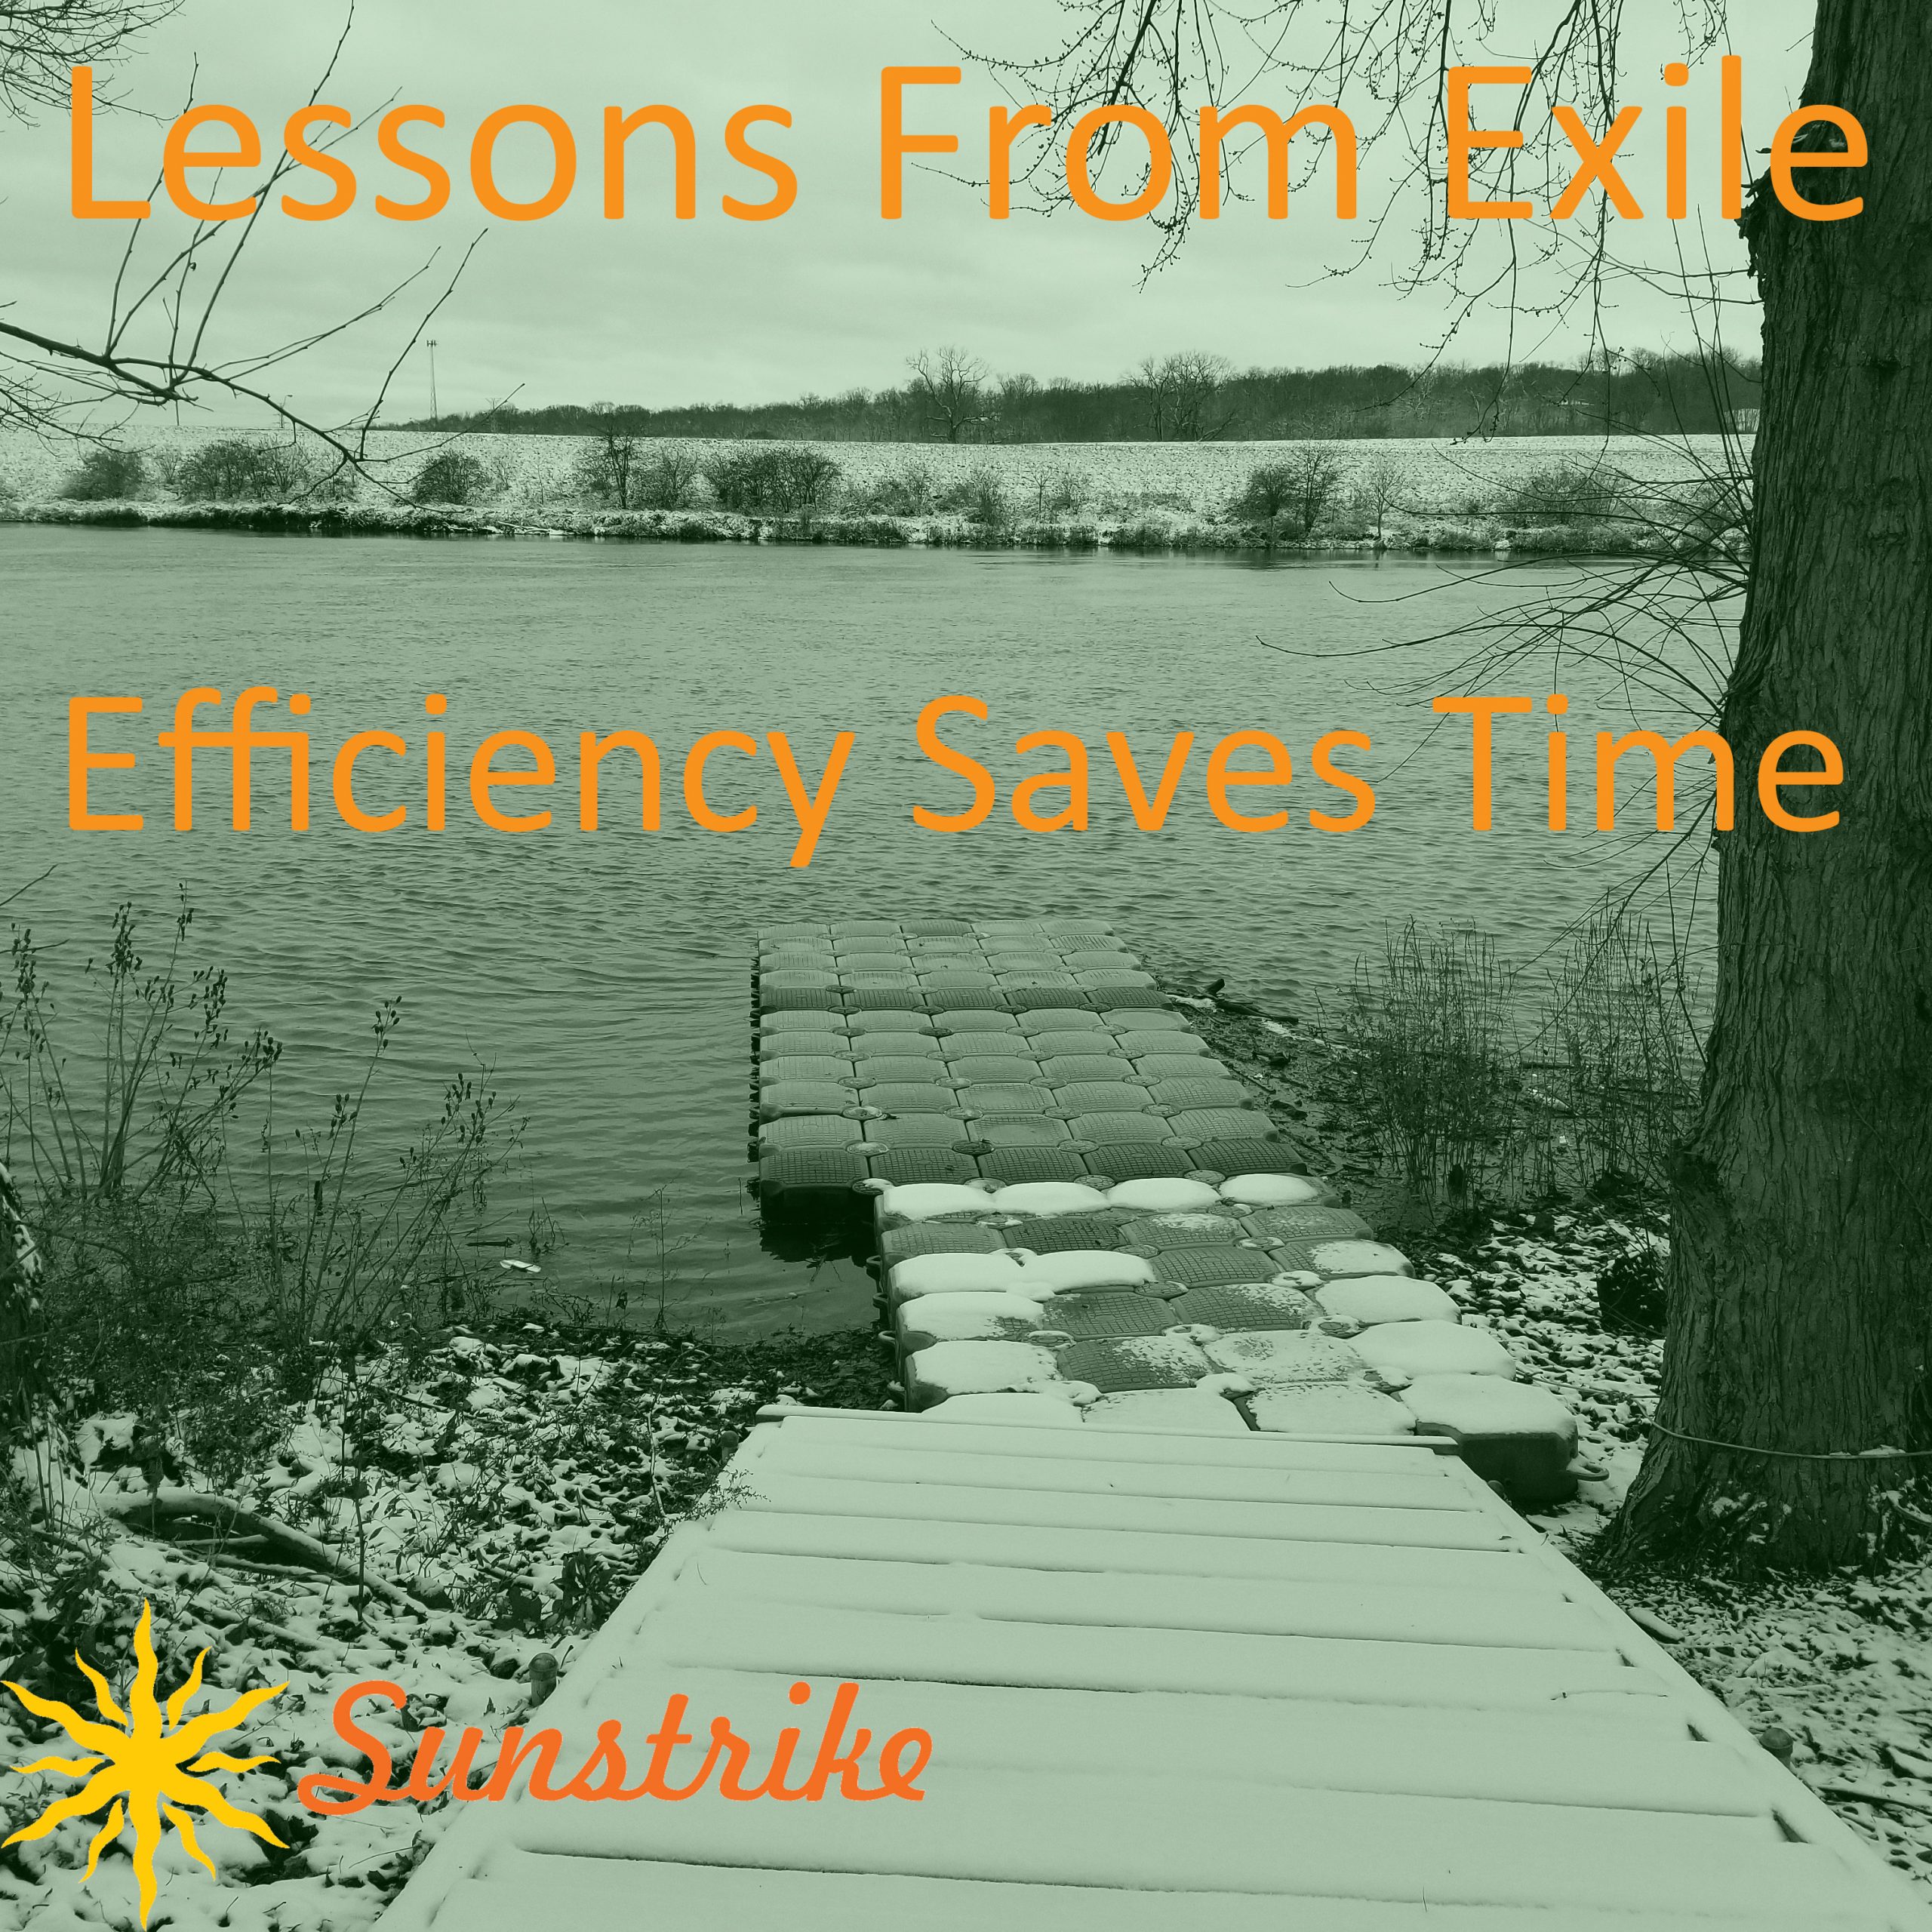 Lessons from Exile #98: Efficiency Saves Time